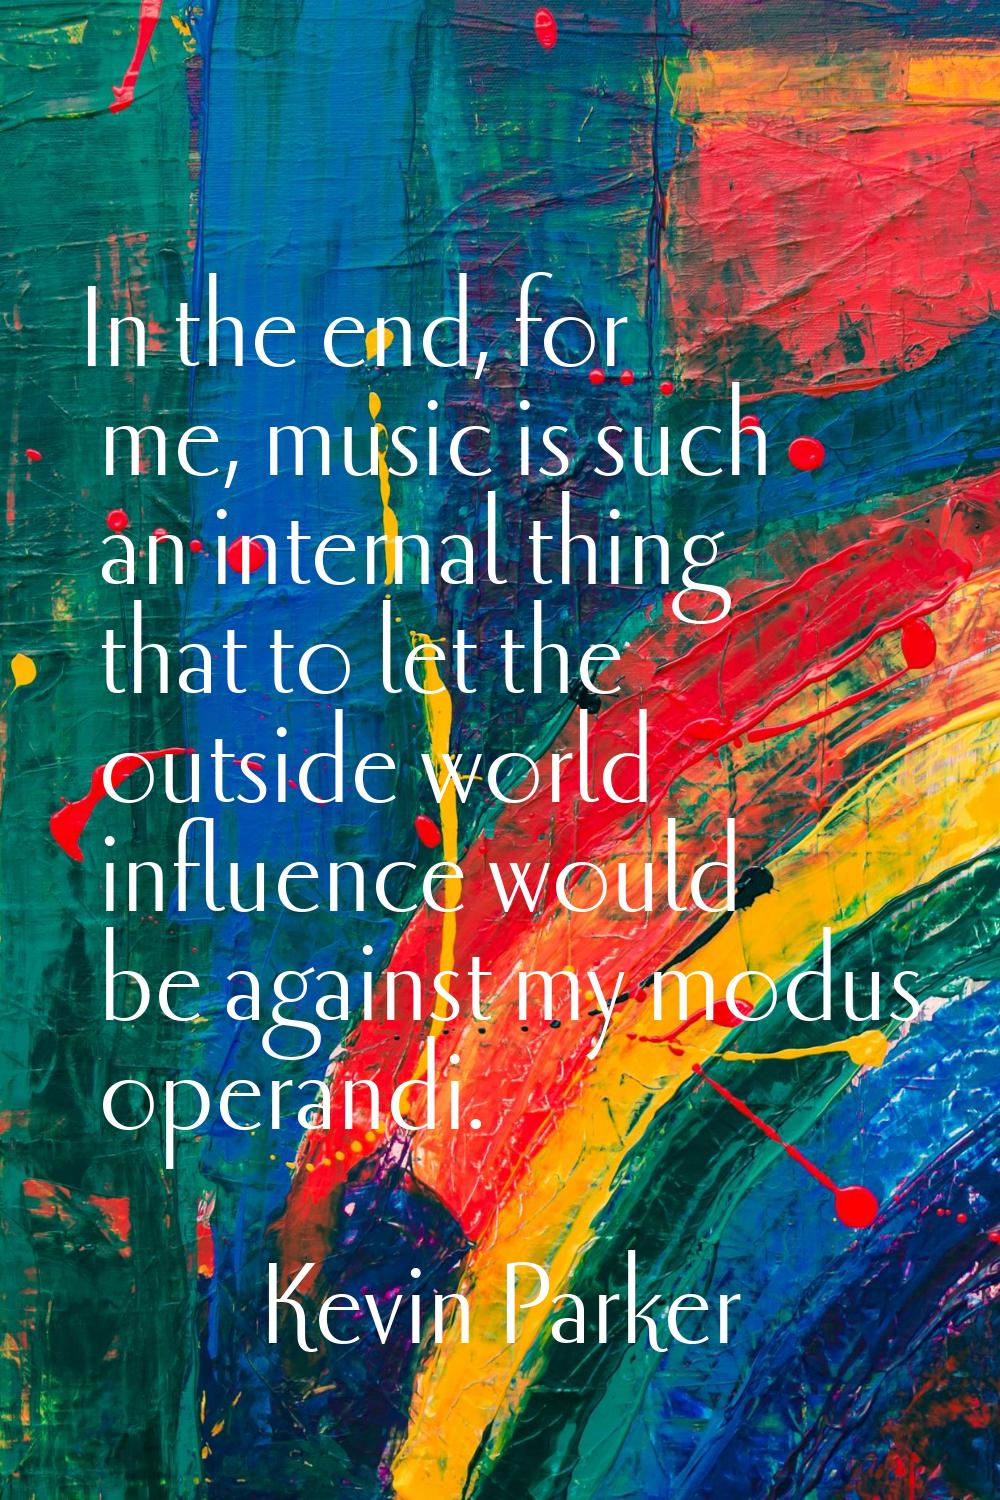 In the end, for me, music is such an internal thing that to let the outside world influence would b